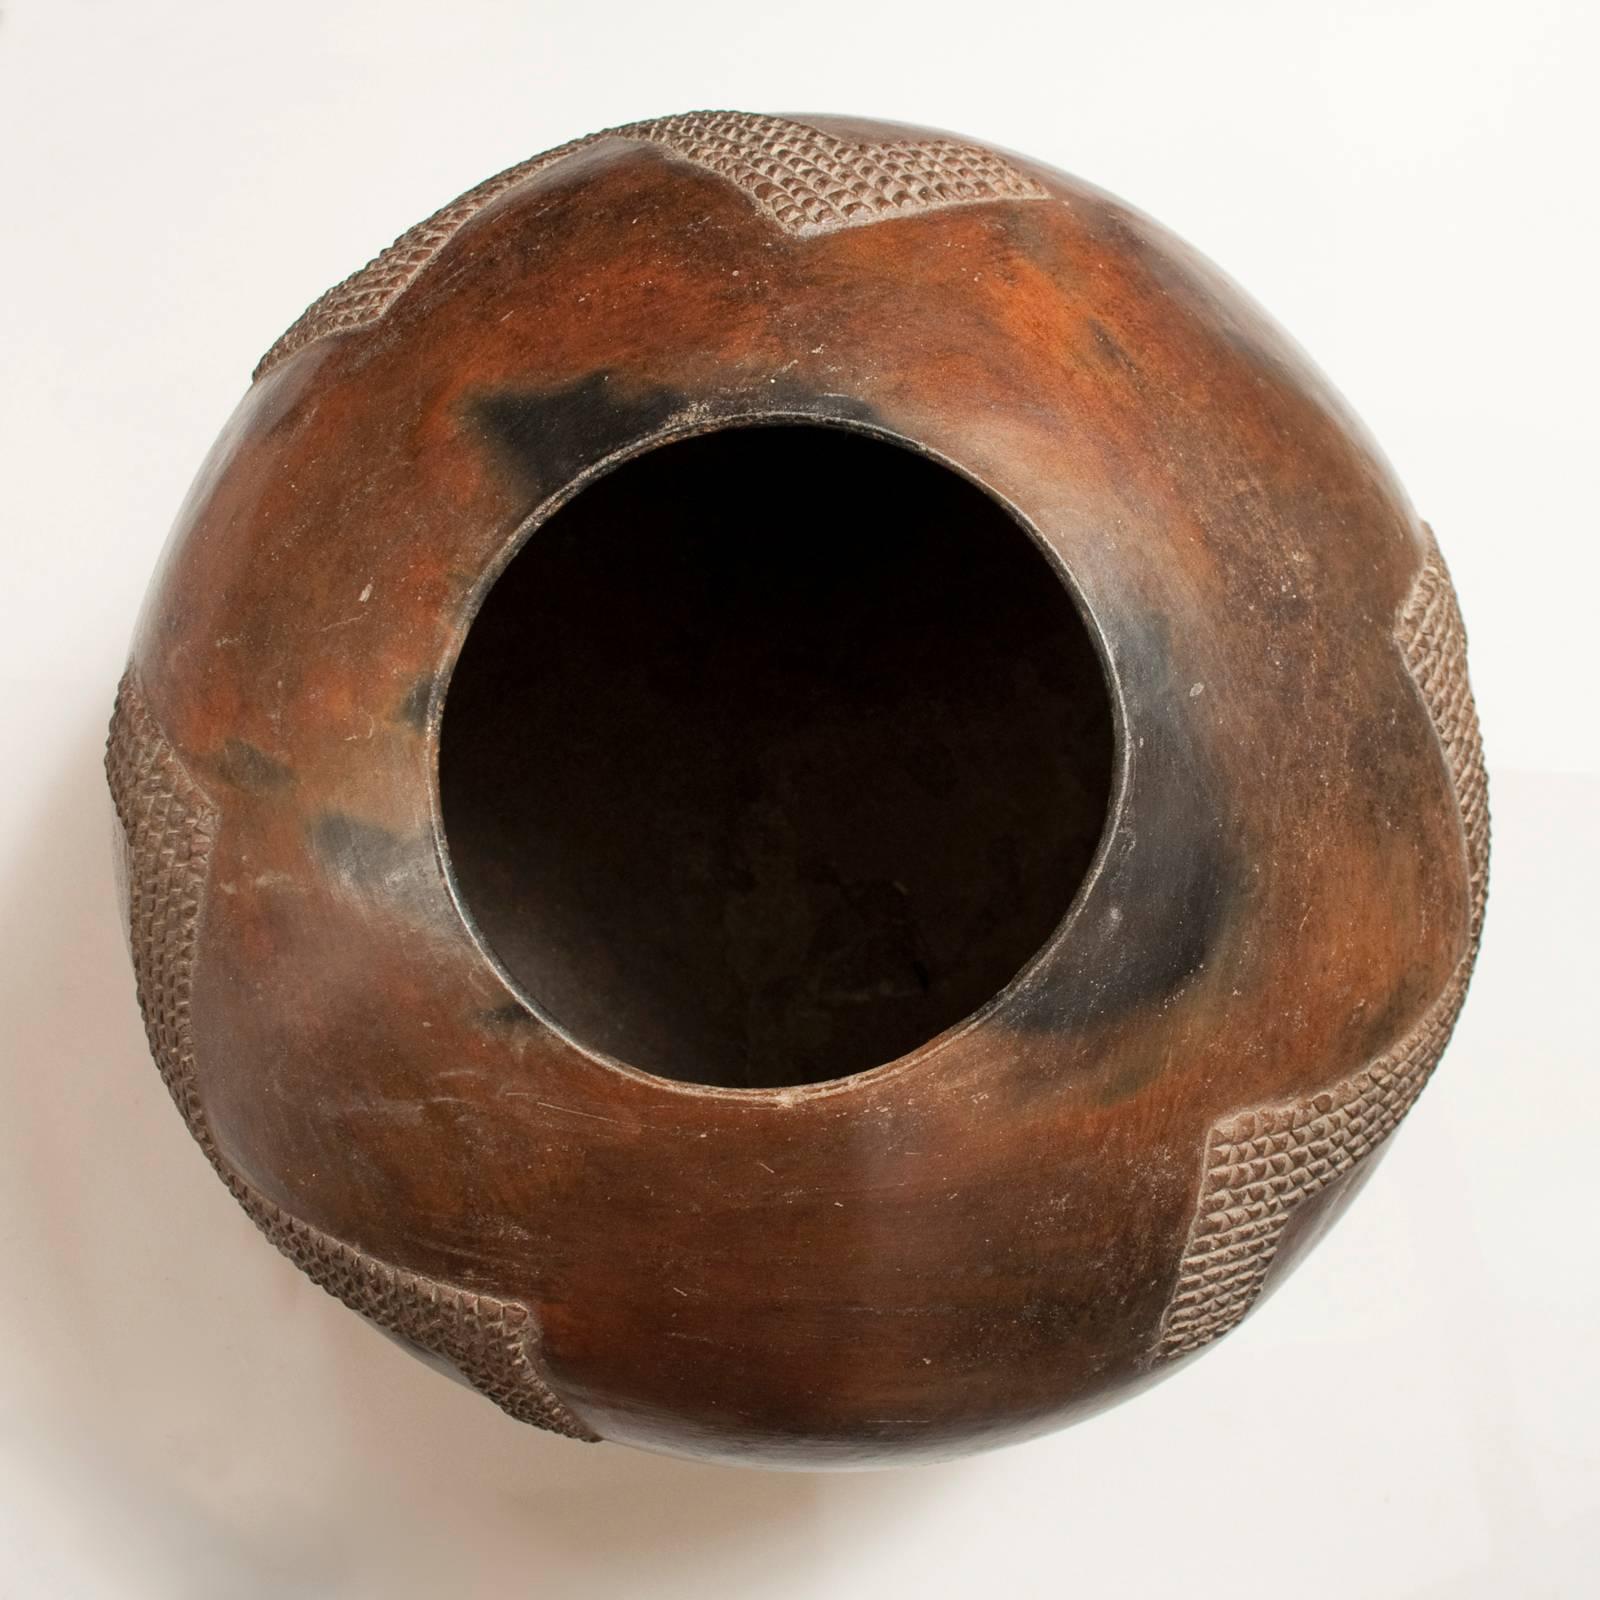 South African Mid-20th Century Zulu Ceramic Beer Pot, South Africa